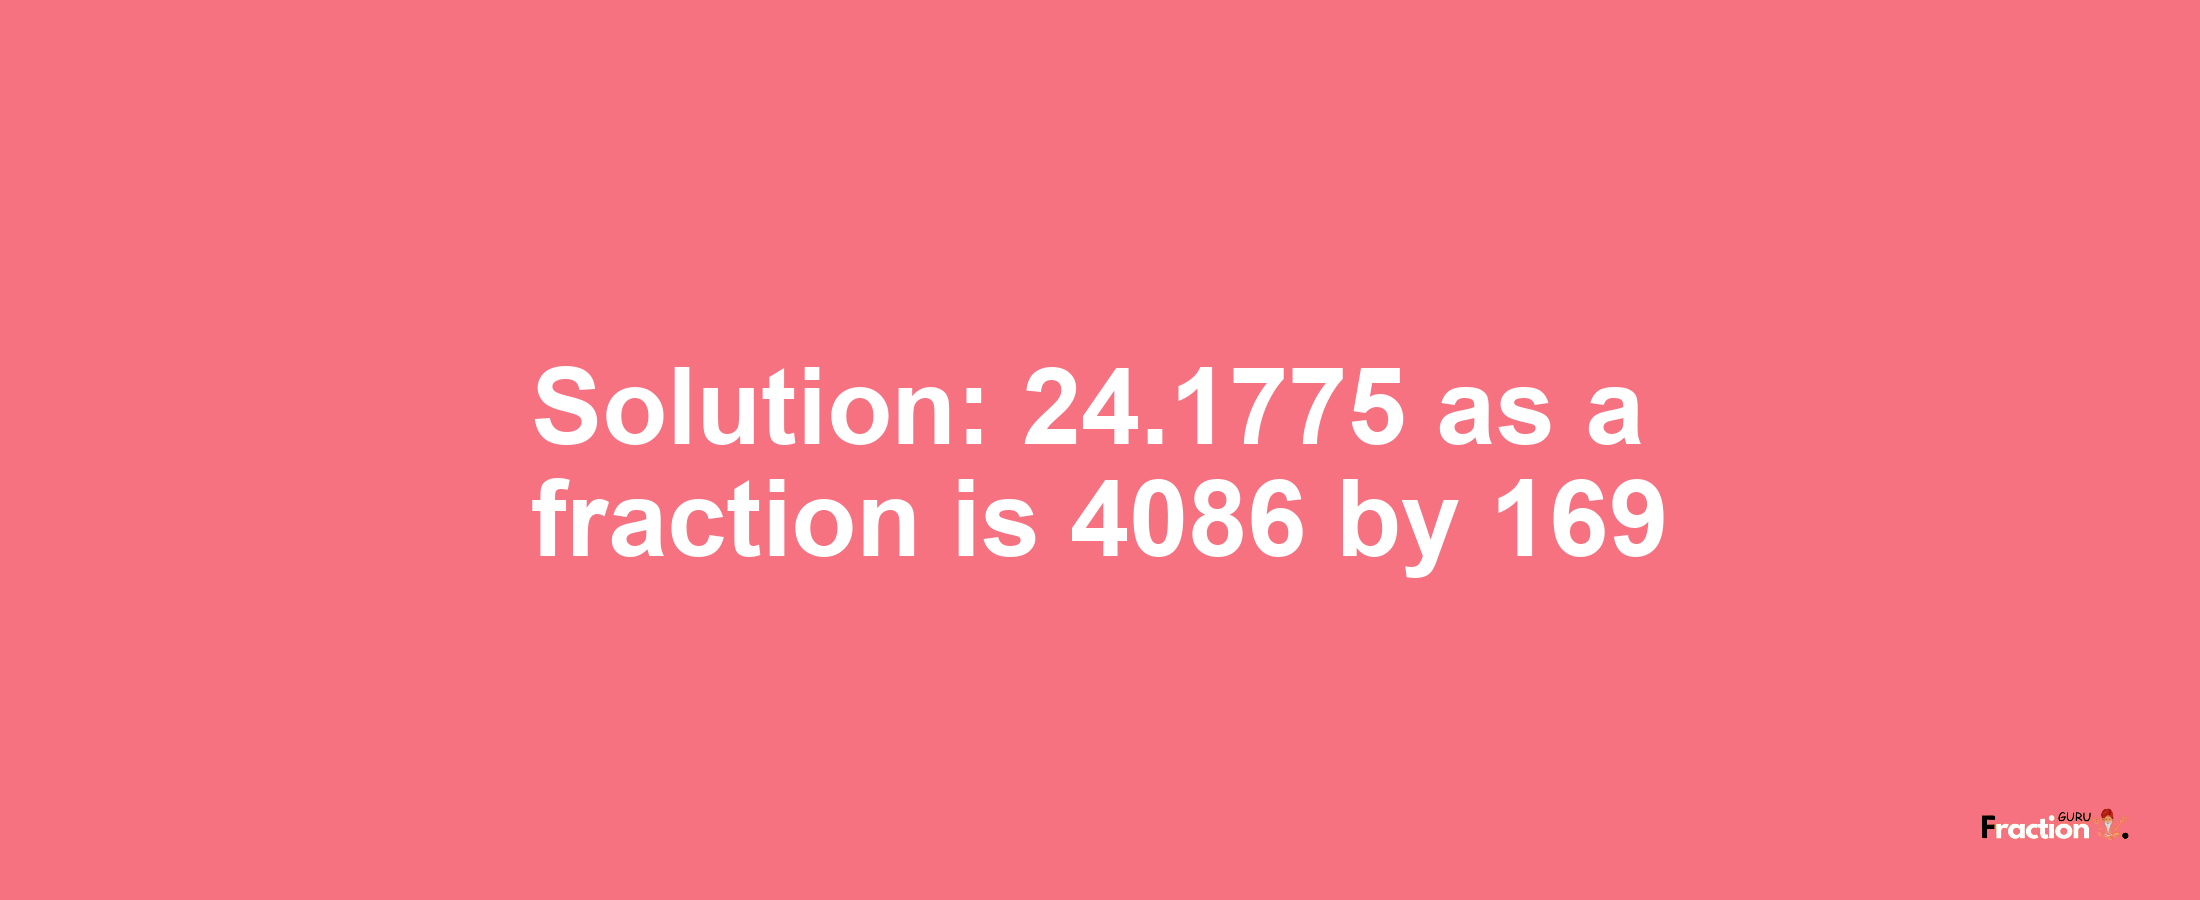 Solution:24.1775 as a fraction is 4086/169